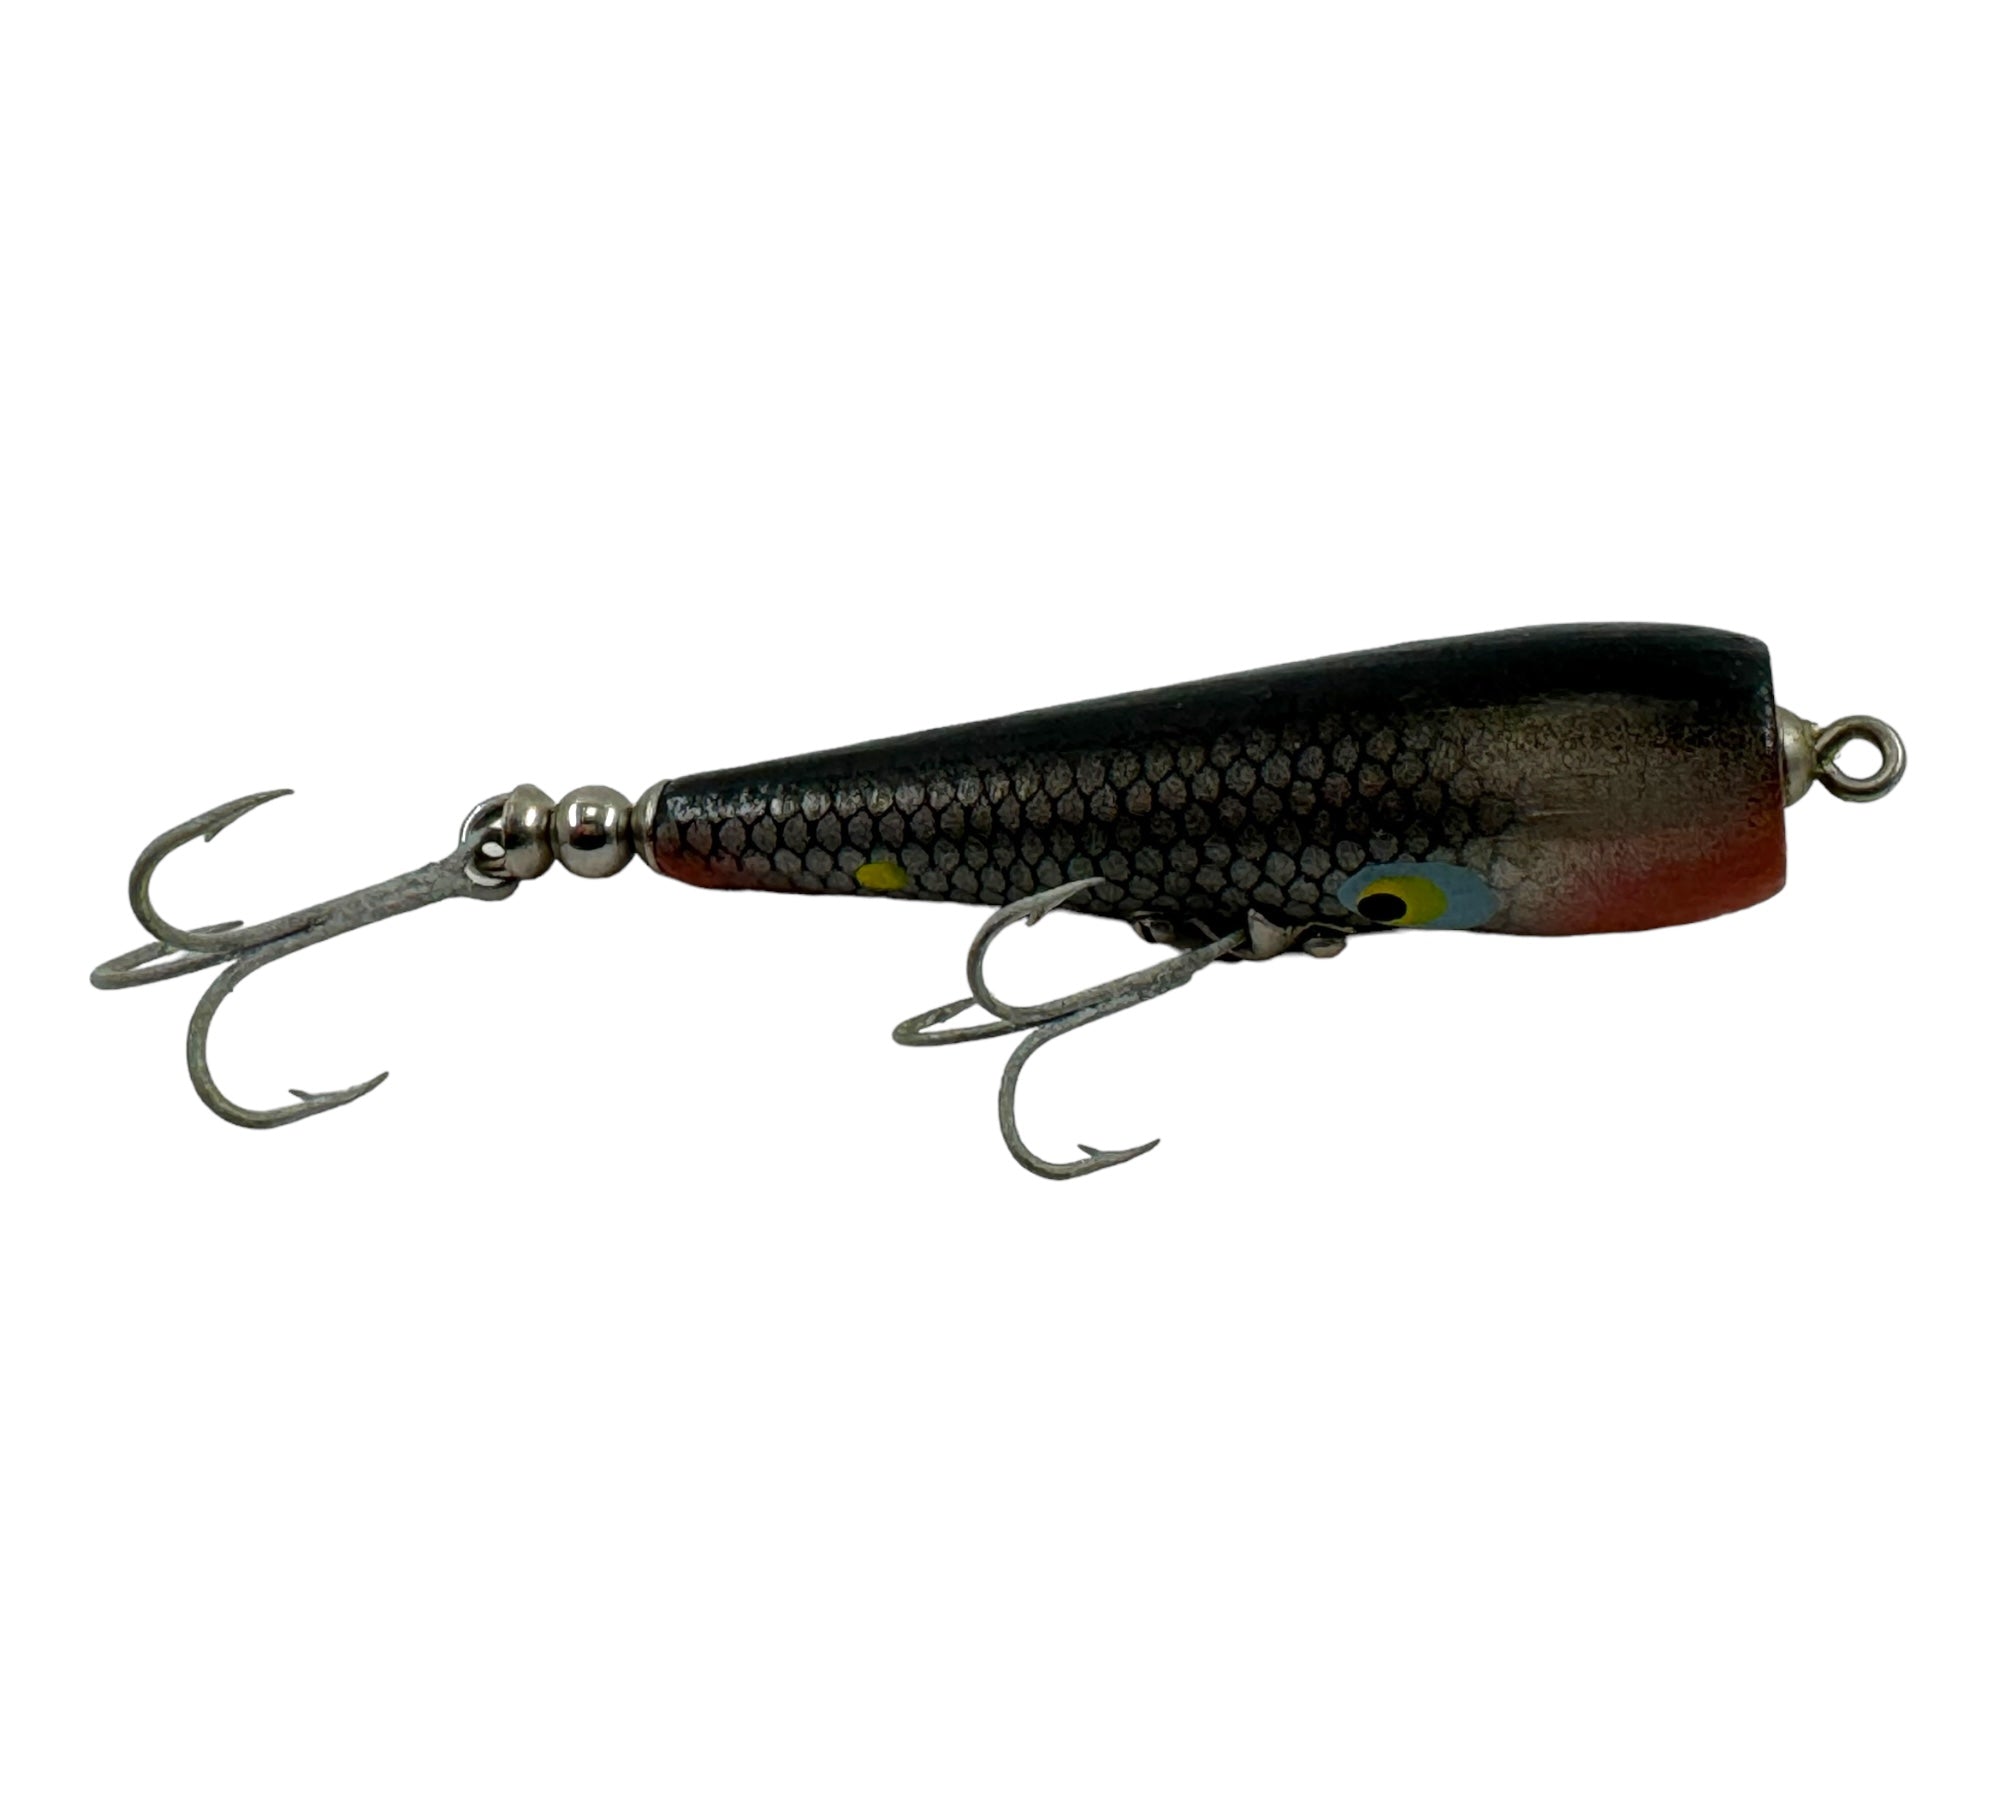 SMITHWICK LURES CARROT TOP Wood Fishing Lure • BLACK SHINER – Toad